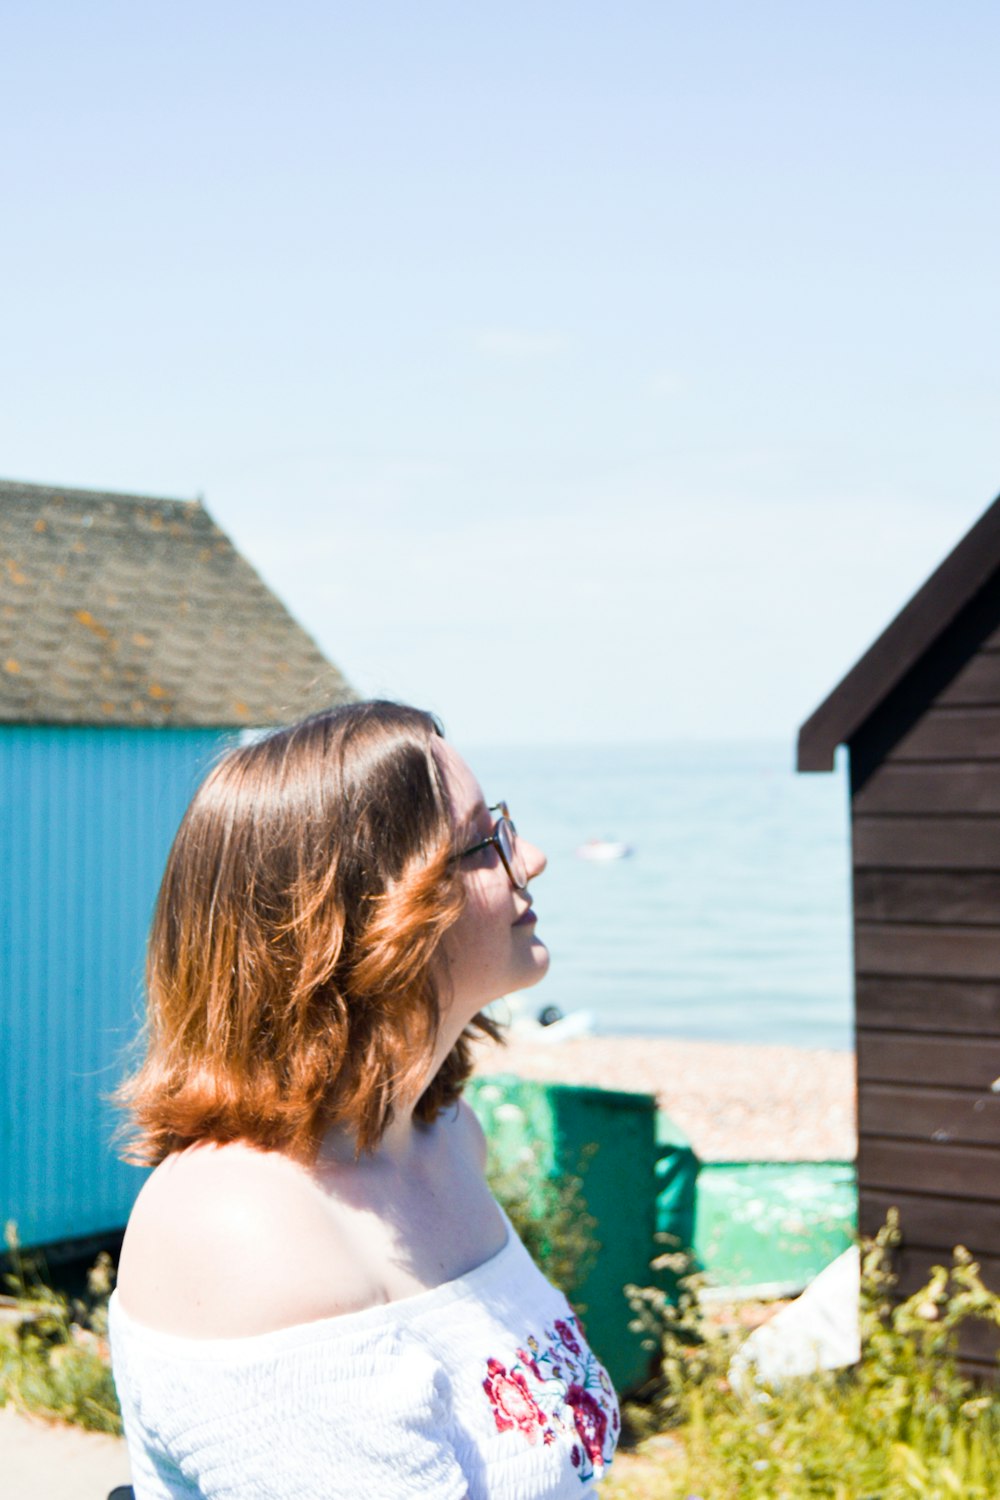 woman in white tank top wearing sunglasses looking at blue wooden house during daytime